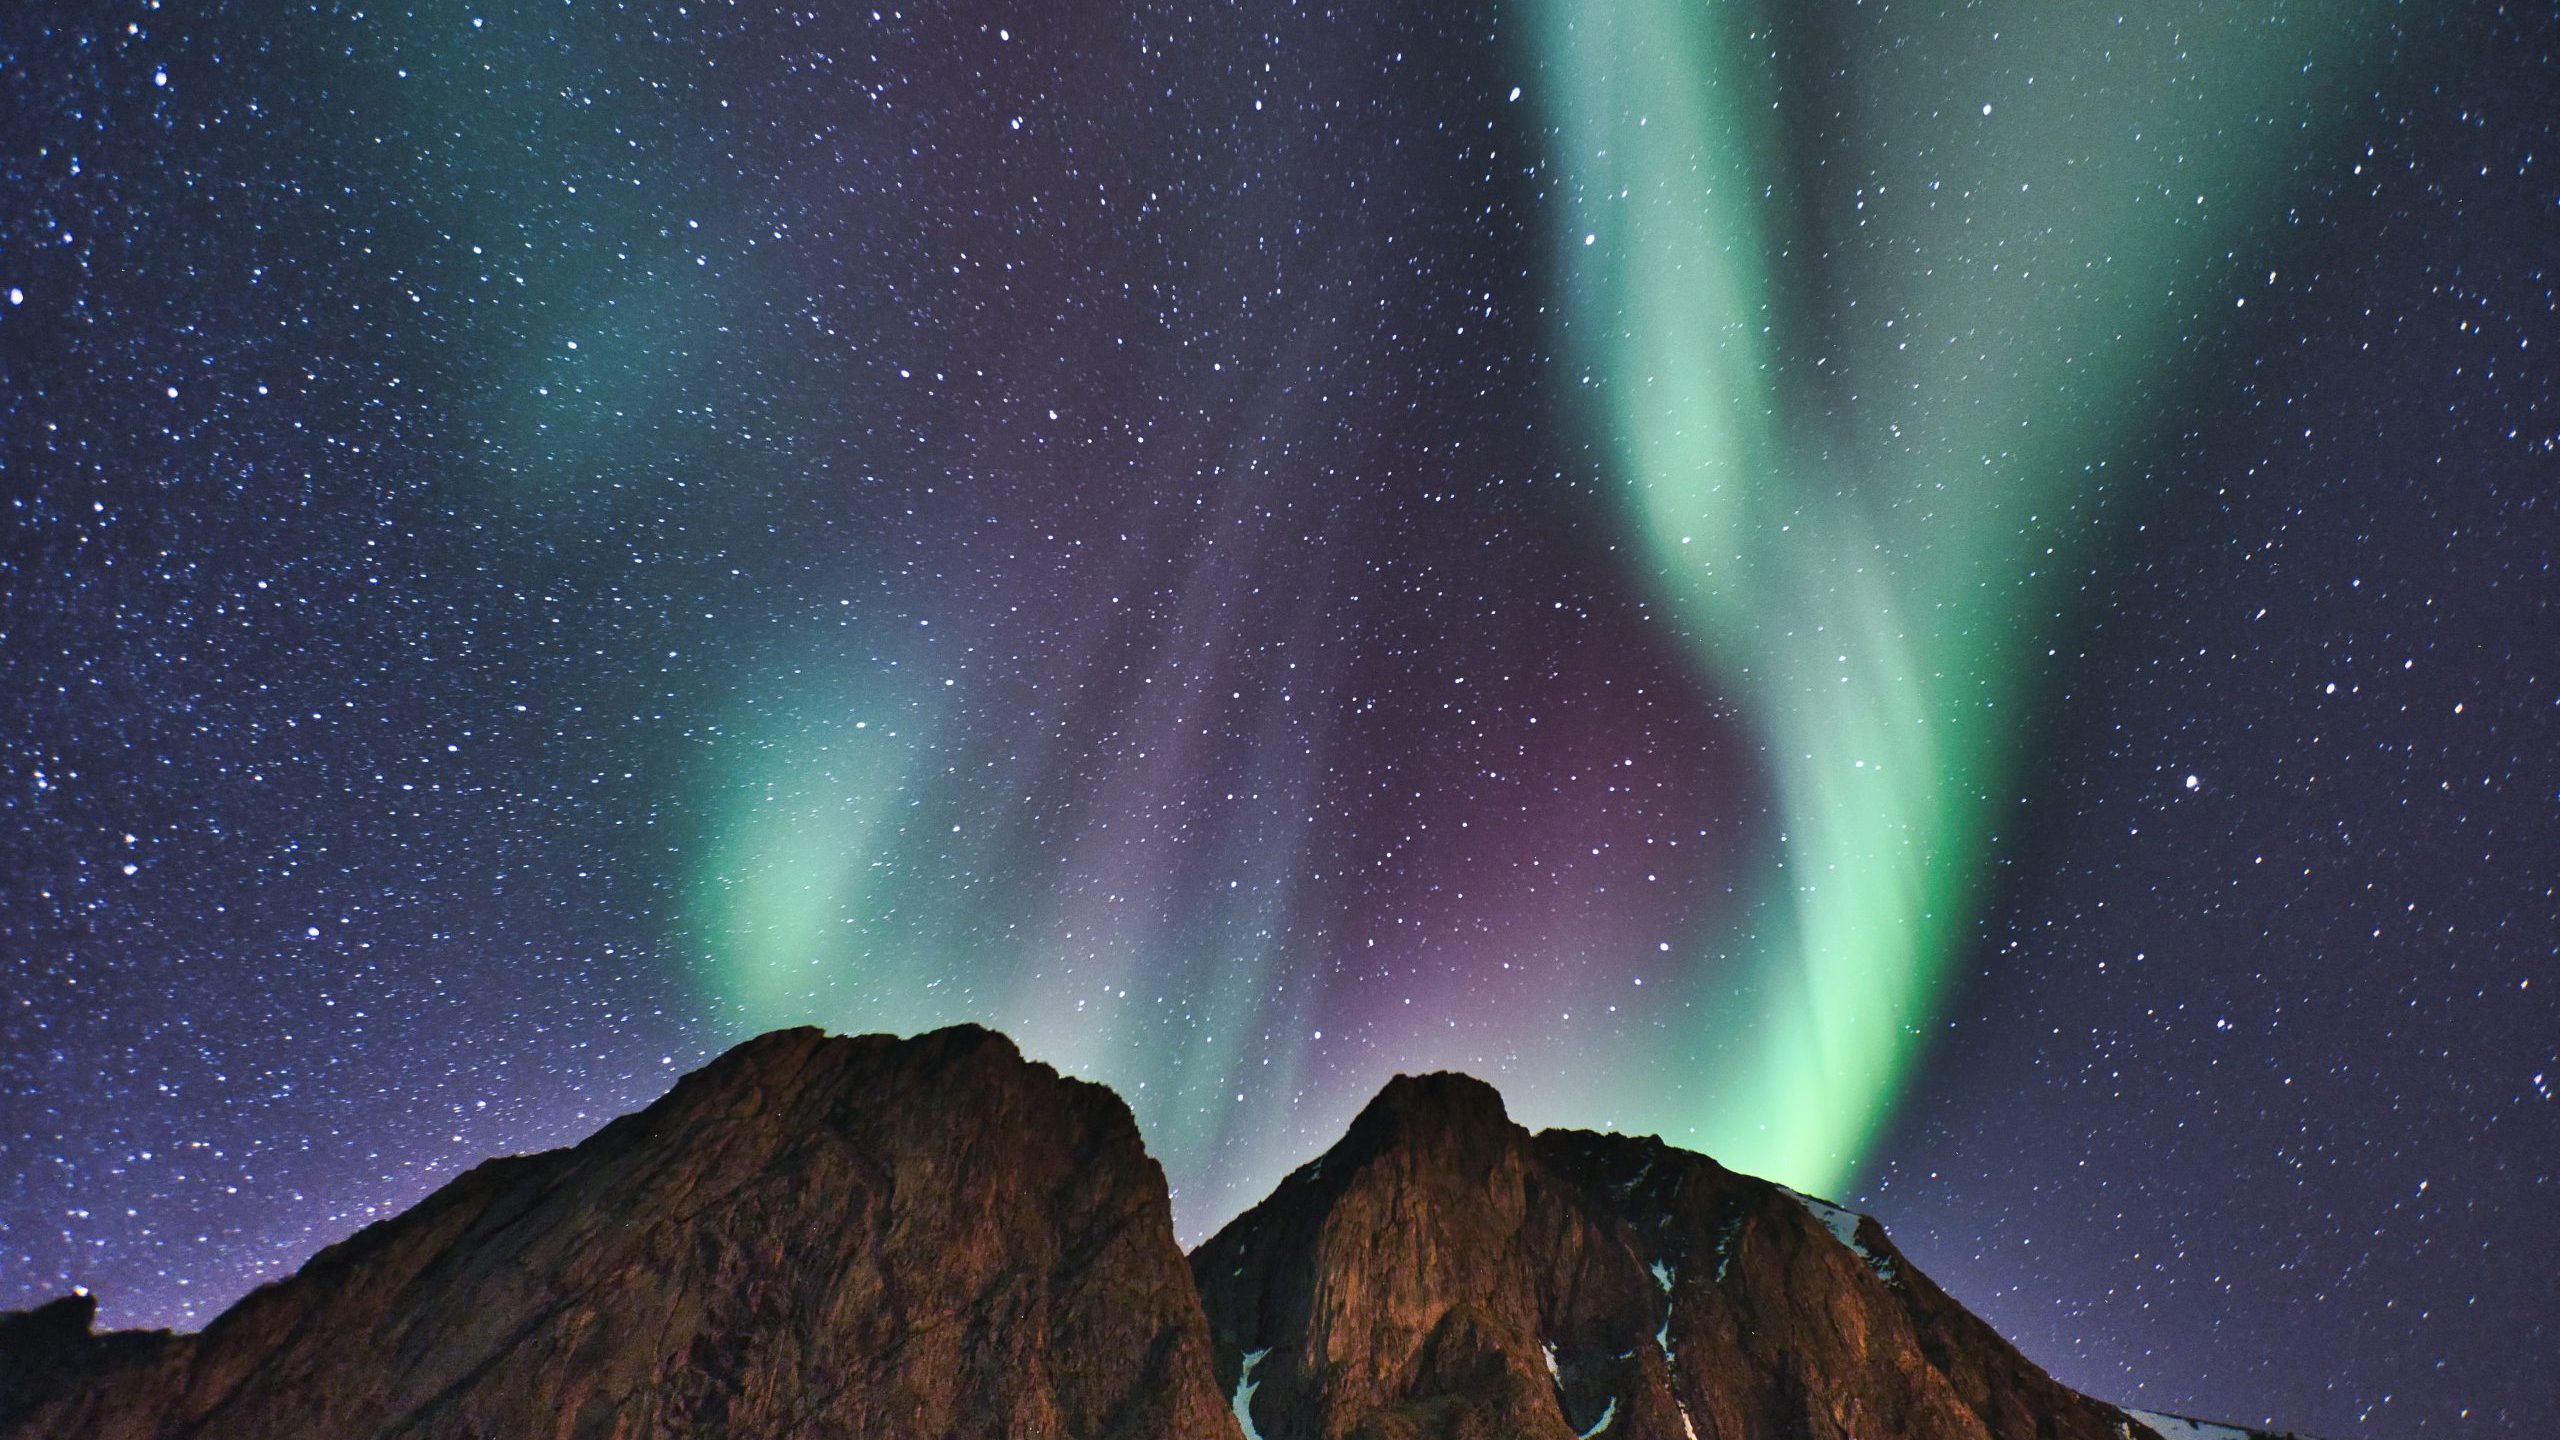 Aurora Borealis Lights Skies Over North America and Europe - The